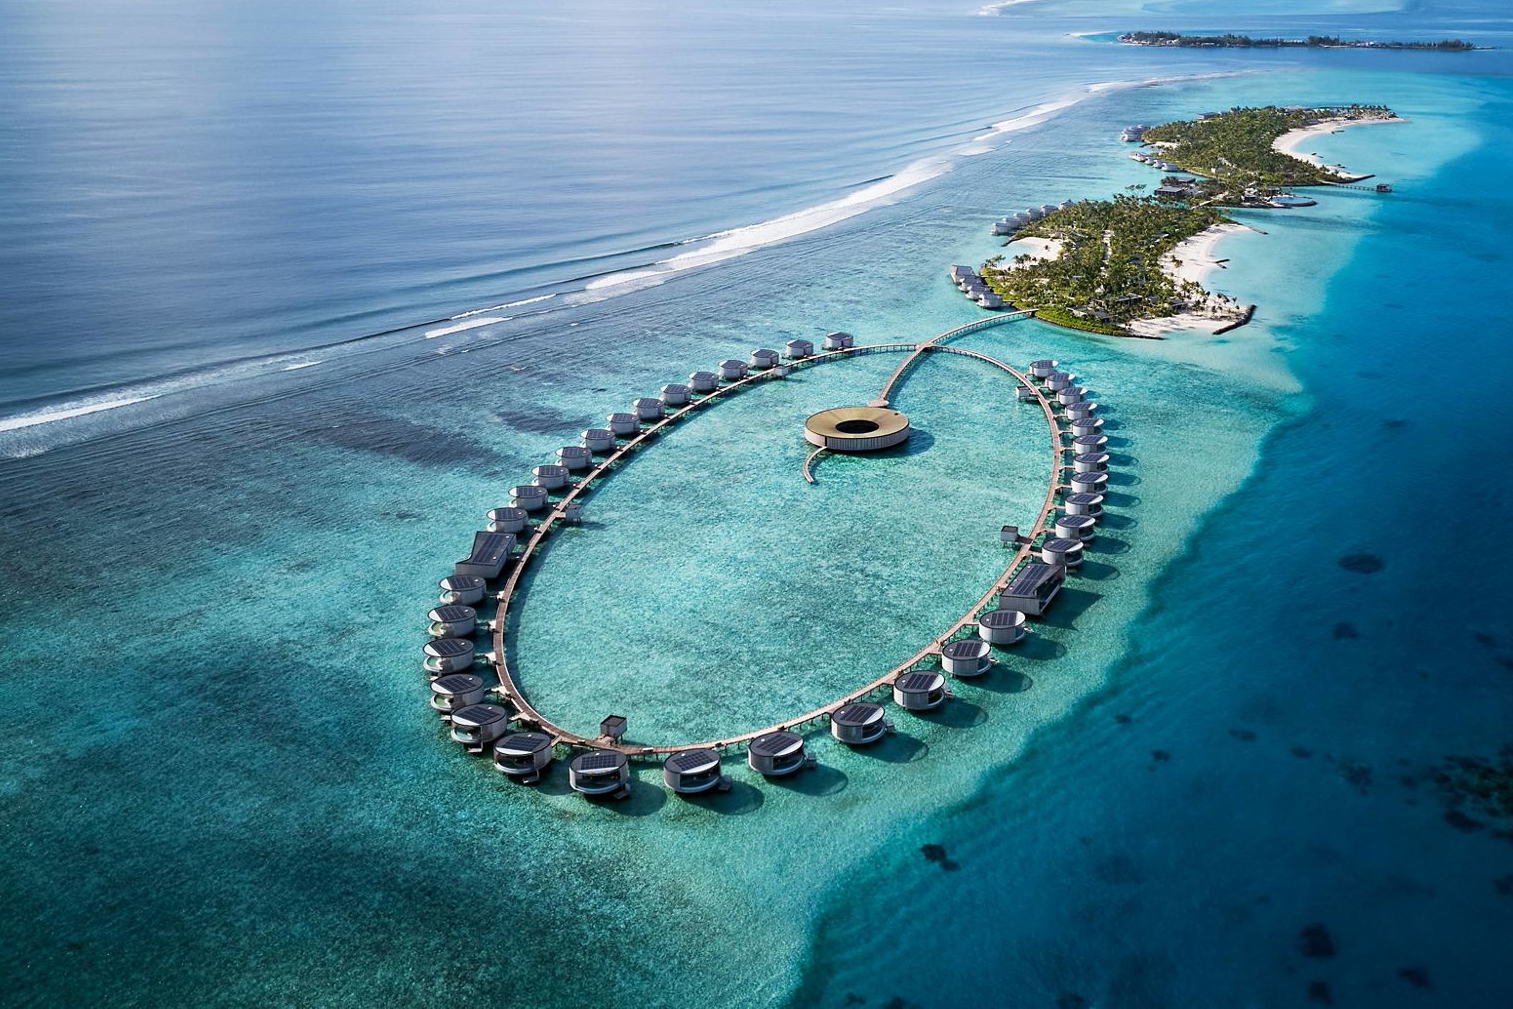 The Ritz-Carlton Maldives is located on the Fari Islands, an archipelago on the north-eastern tip of North Malé Atoll. Click to enlarge.